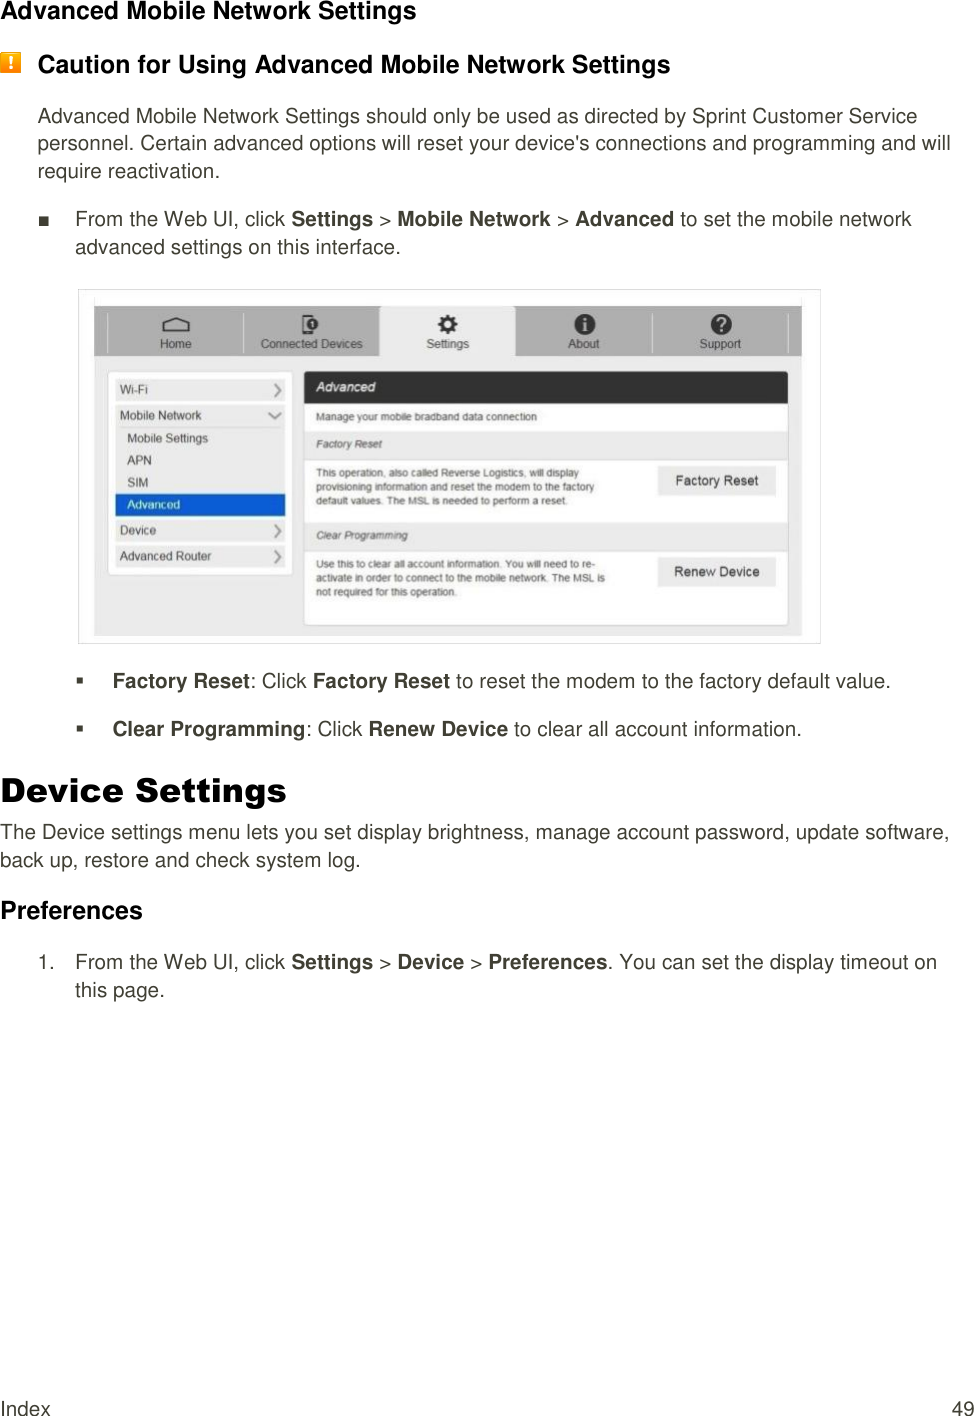 Index  49 Advanced Mobile Network Settings  Caution for Using Advanced Mobile Network Settings Advanced Mobile Network Settings should only be used as directed by Sprint Customer Service personnel. Certain advanced options will reset your device&apos;s connections and programming and will require reactivation. ■  From the Web UI, click Settings &gt; Mobile Network &gt; Advanced to set the mobile network advanced settings on this interface.    Factory Reset: Click Factory Reset to reset the modem to the factory default value.  Clear Programming: Click Renew Device to clear all account information. Device Settings The Device settings menu lets you set display brightness, manage account password, update software, back up, restore and check system log. Preferences 1.  From the Web UI, click Settings &gt; Device &gt; Preferences. You can set the display timeout on this page. 